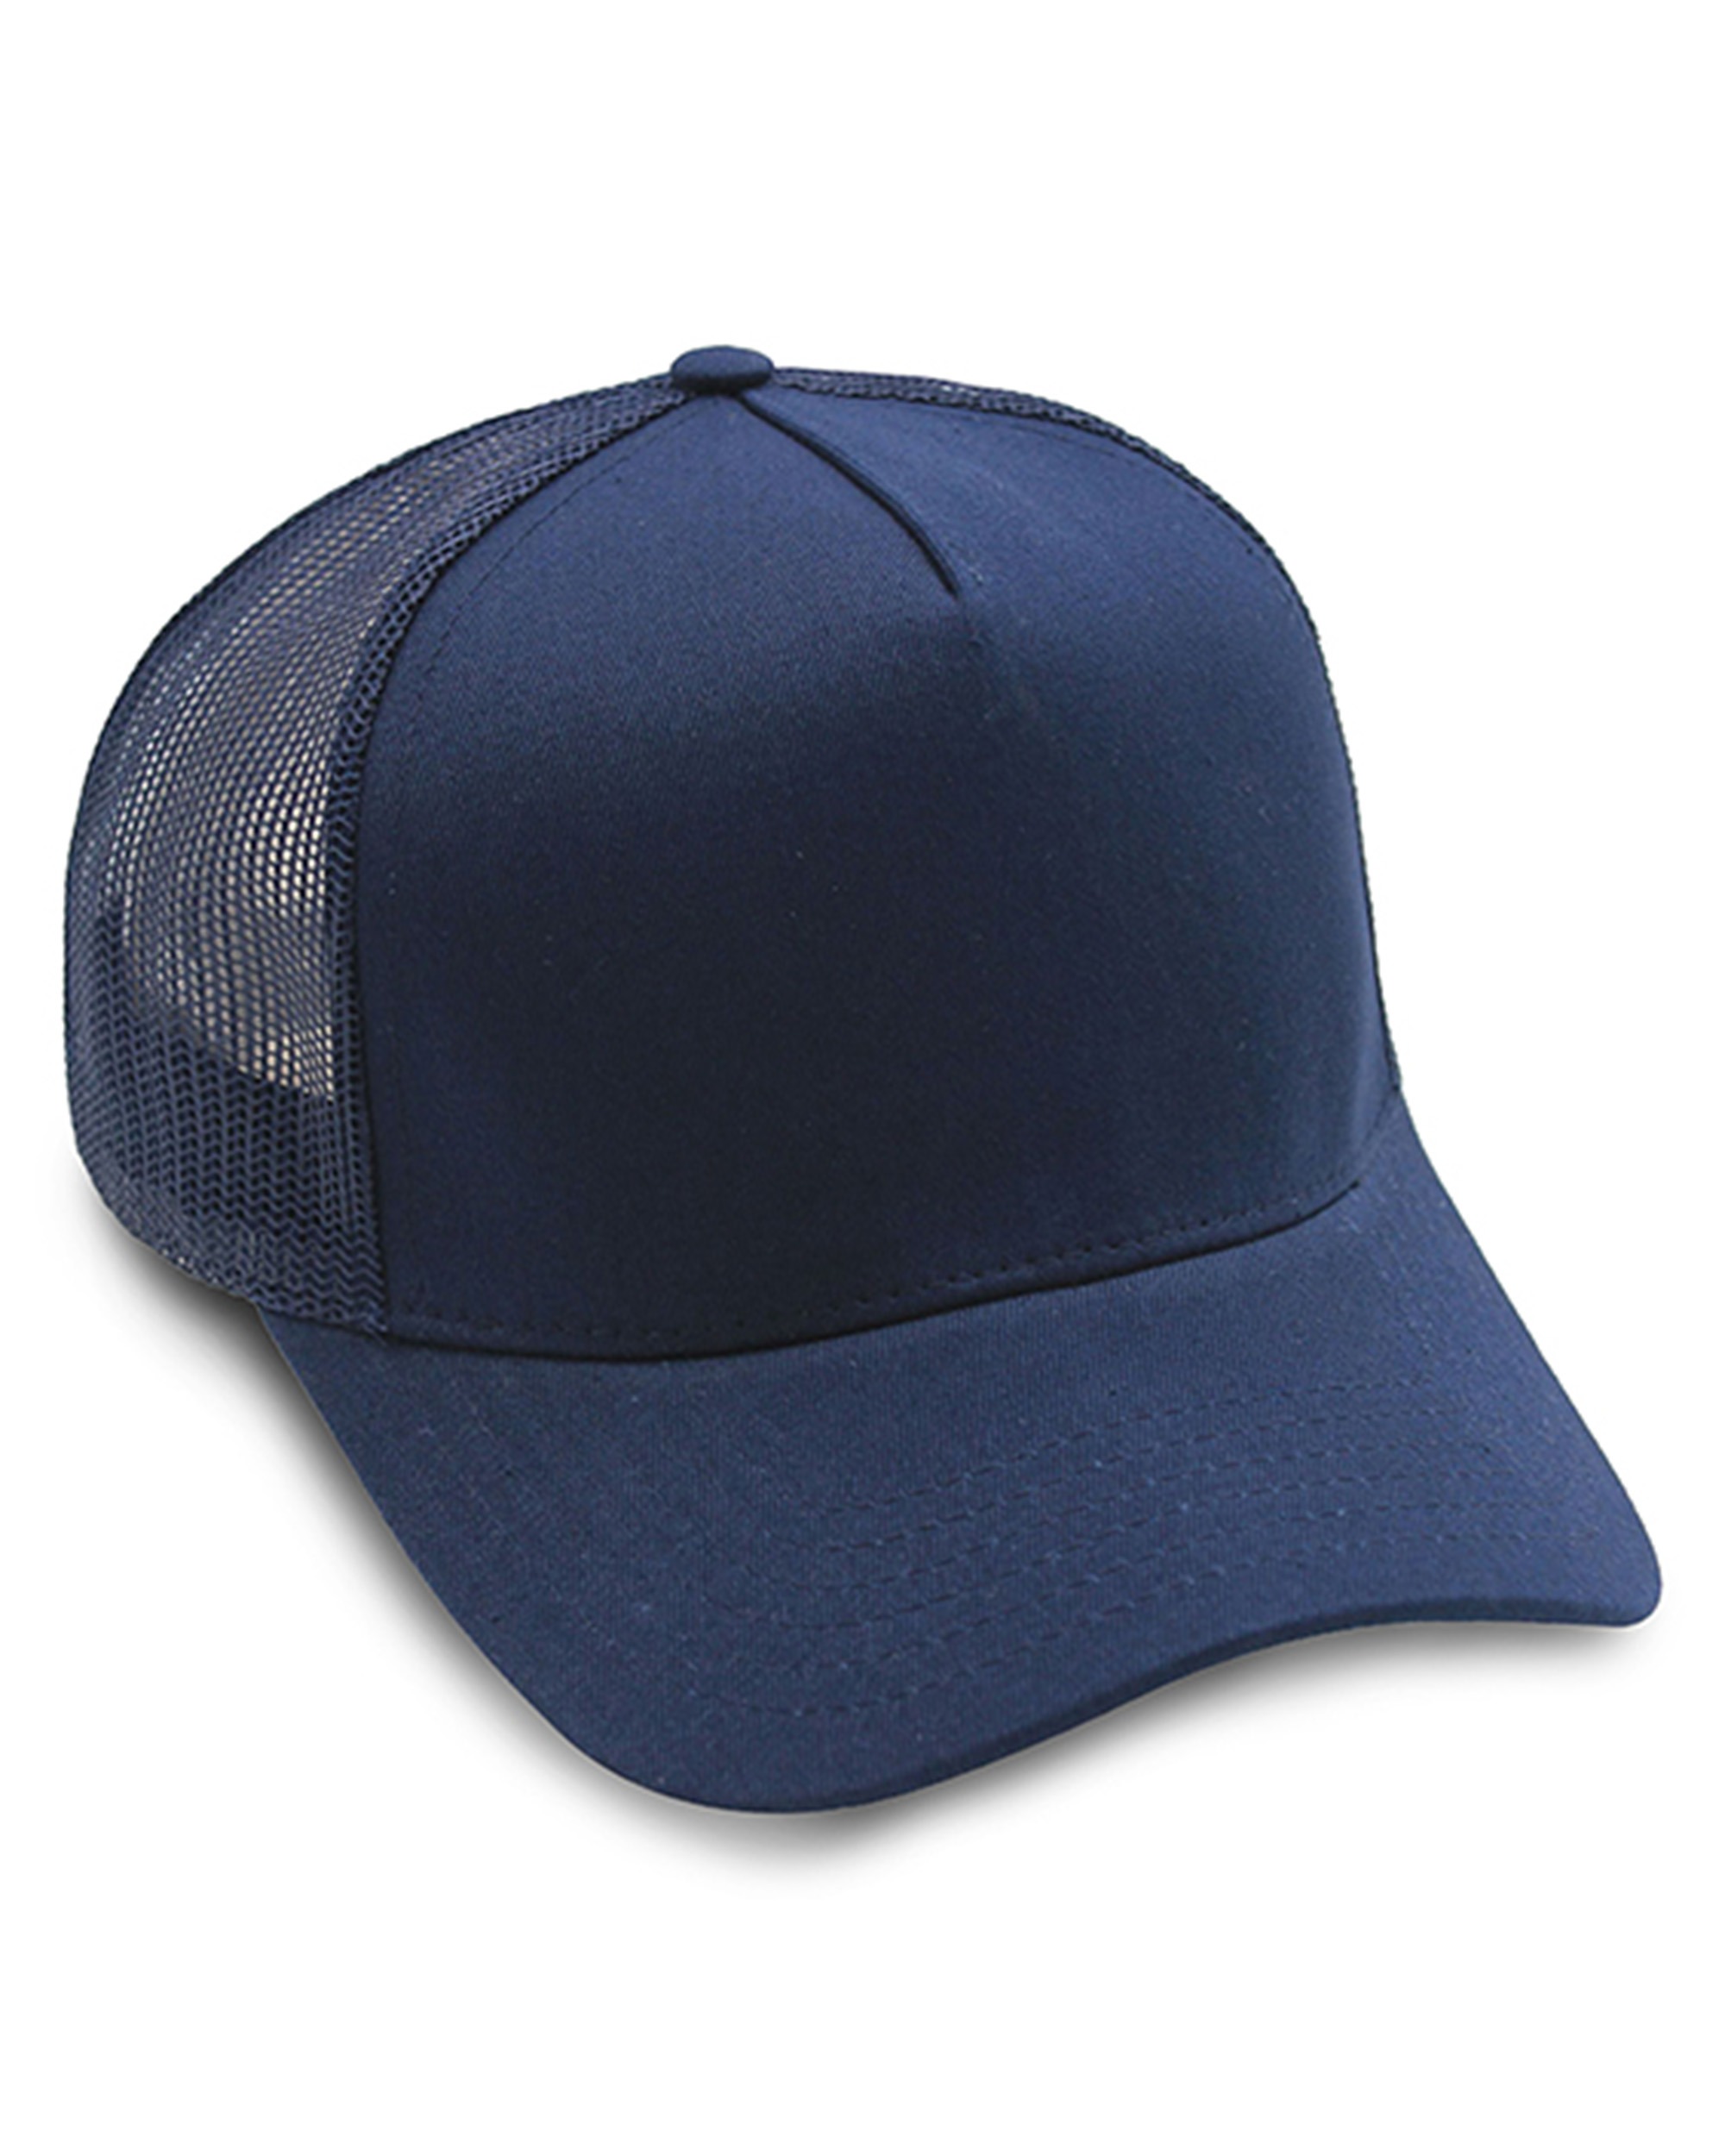 EastWest Embroidery 8540 Deluxe 5 Panel Constructed Cotton Twill Pro Cap